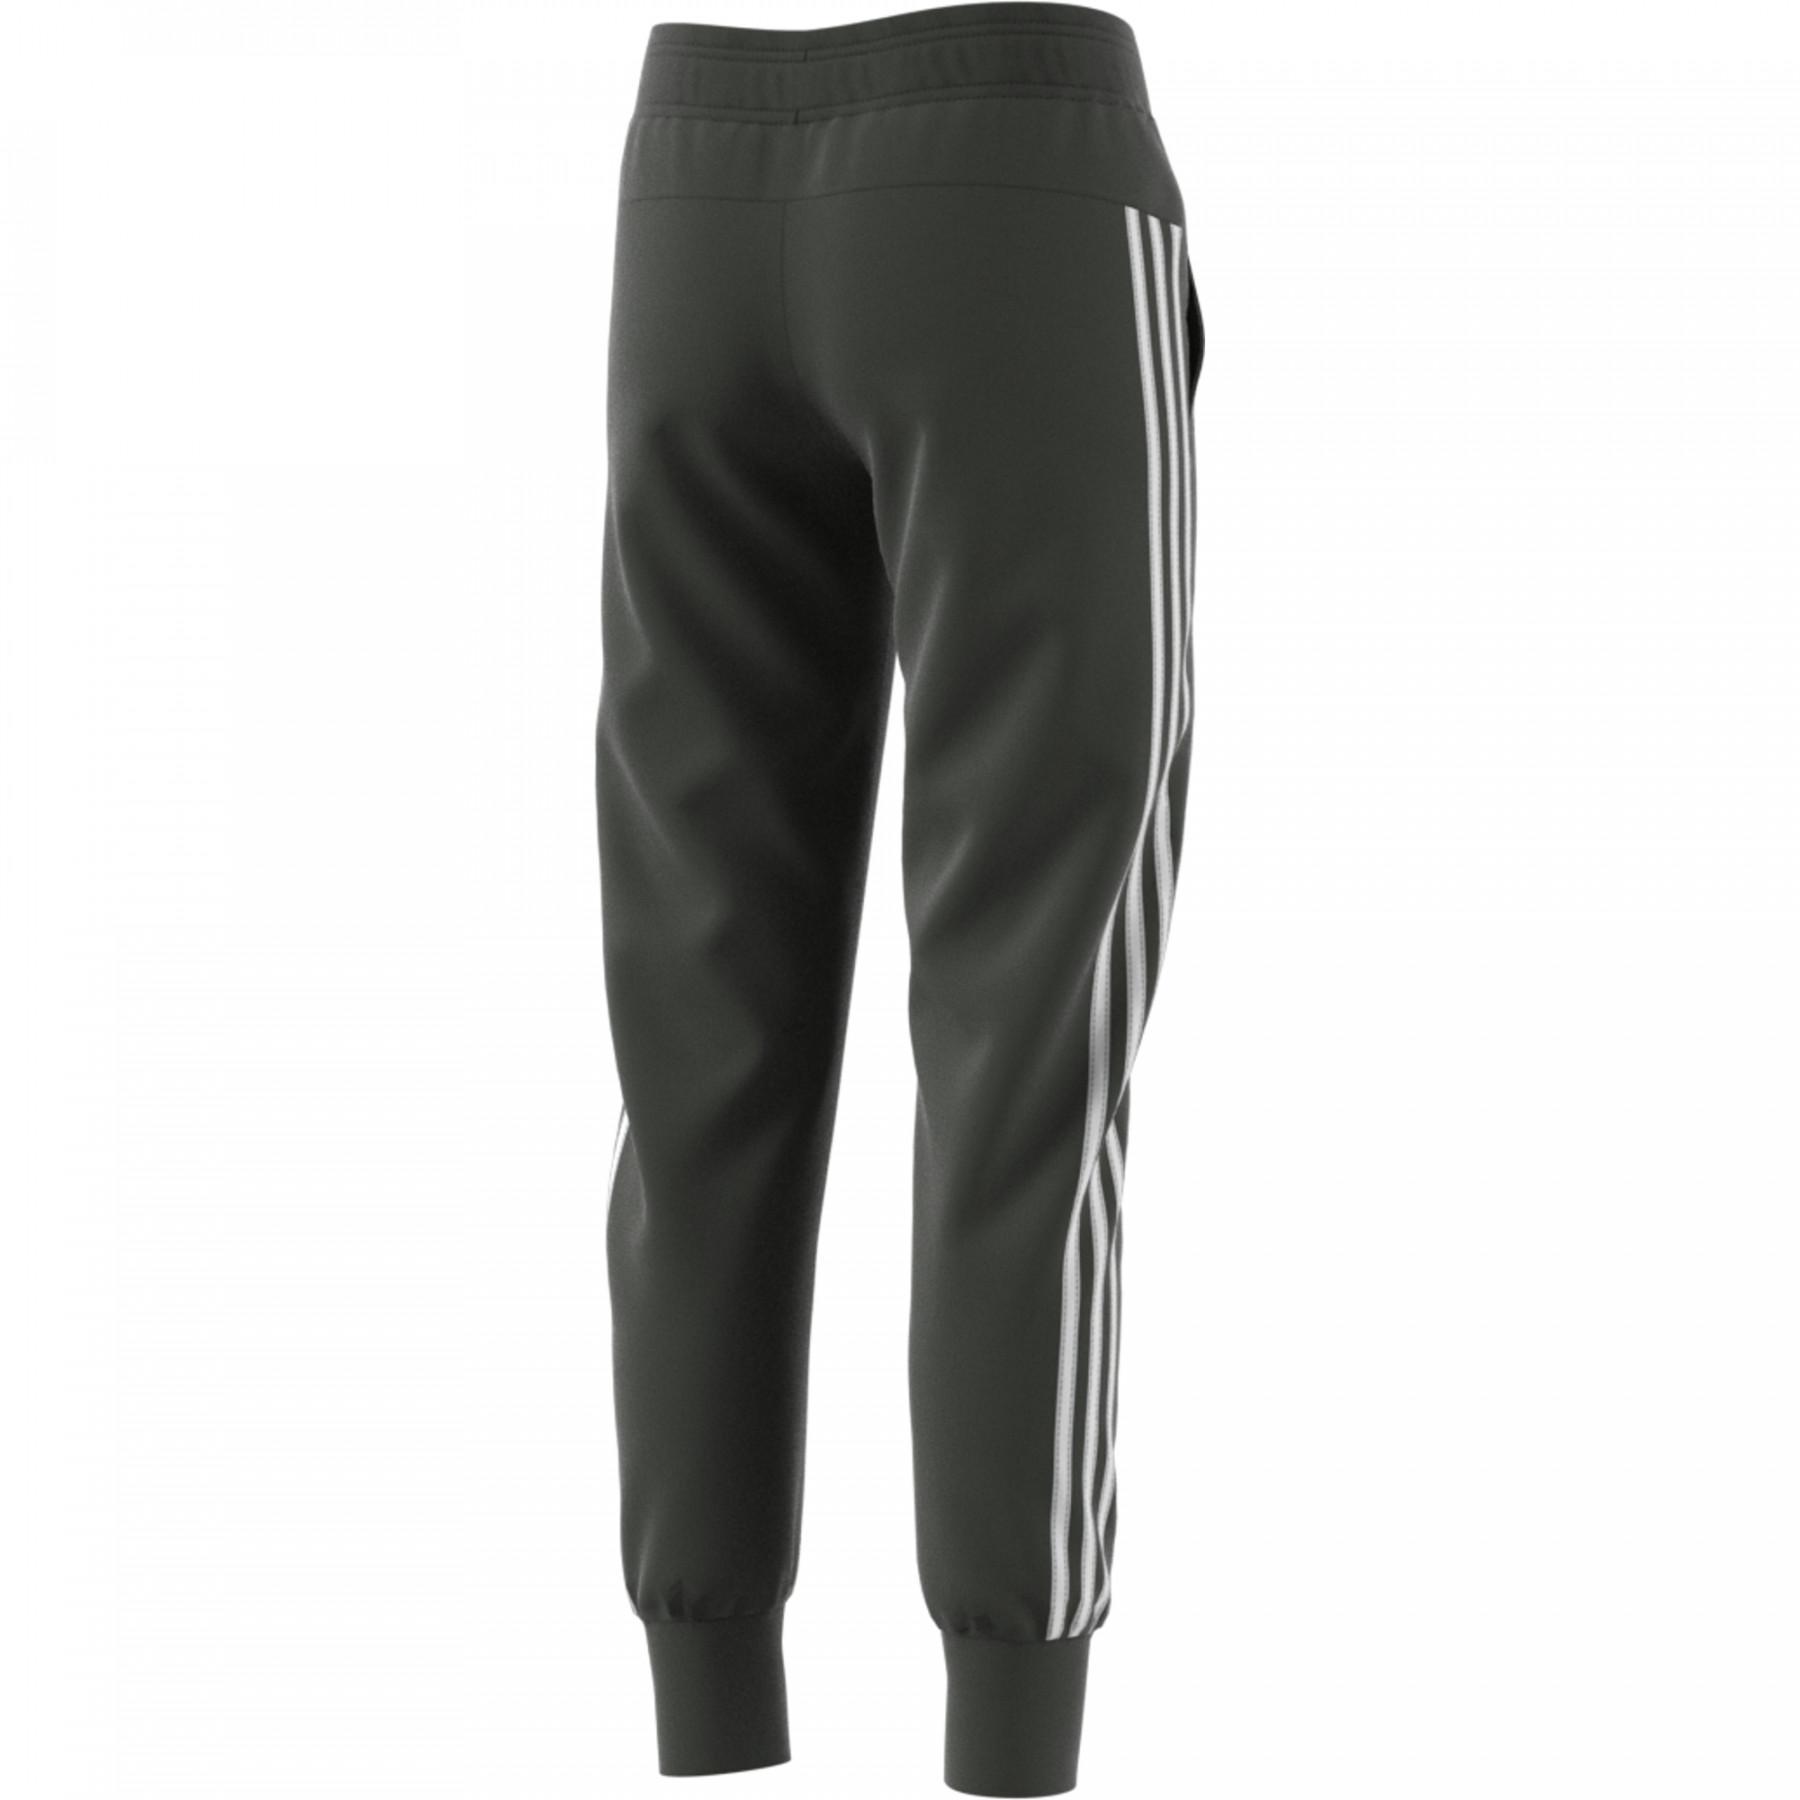 Women's trousers child adidas Must Haves 3-Stripes